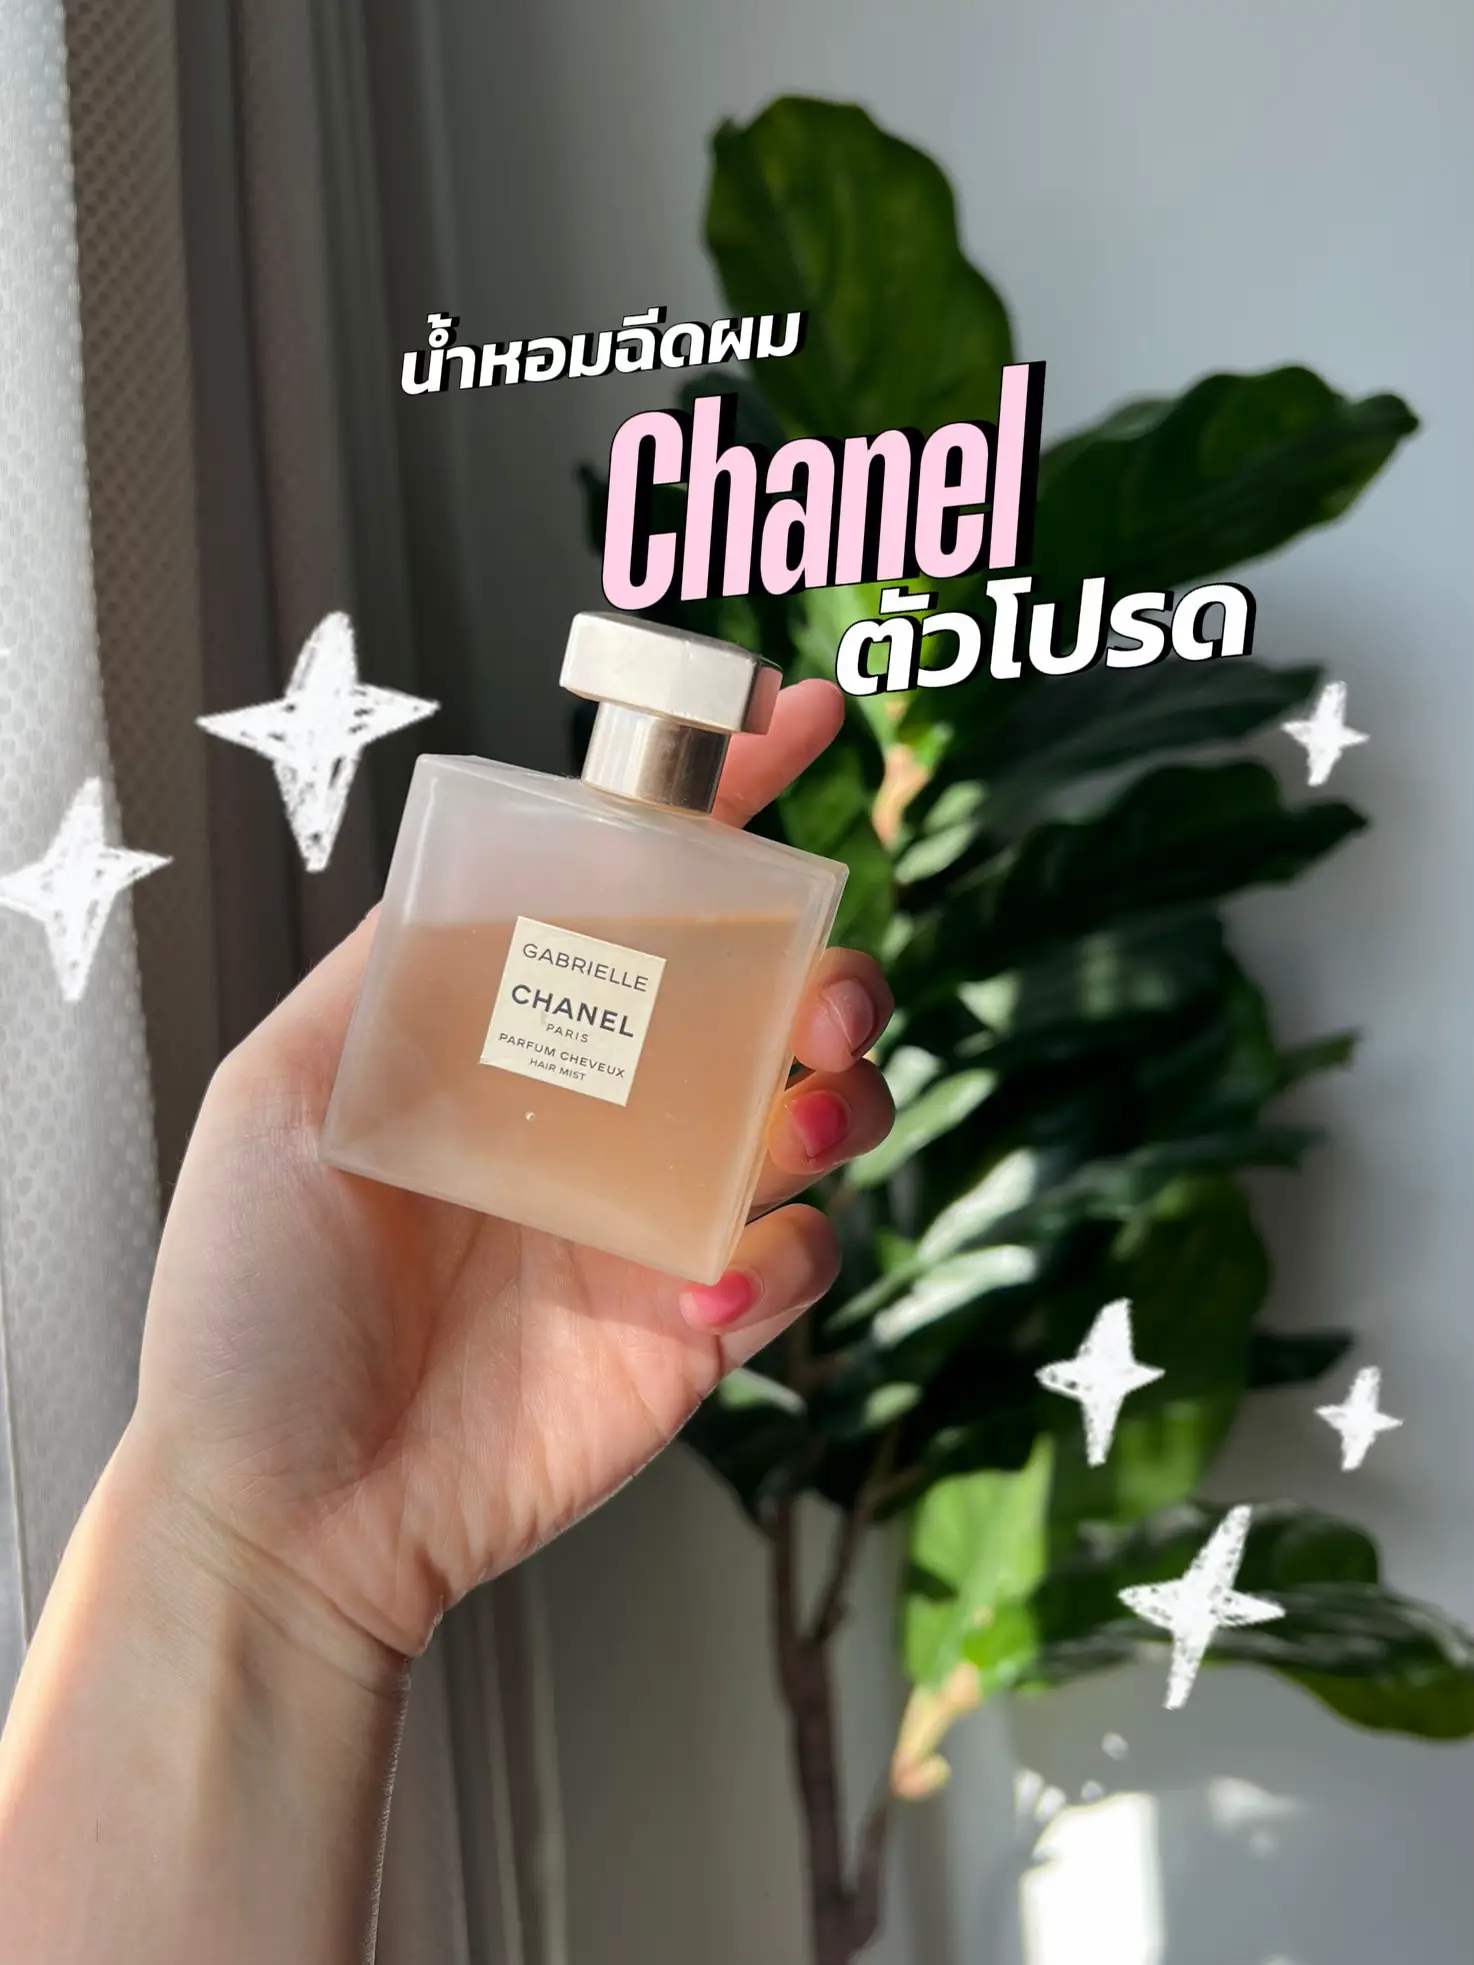 Chanel Gabrielle Hair mist ❤️, Gallery posted by 𝐏𝐲𝐦𝐜𝐡𝐚𝐲𝐚